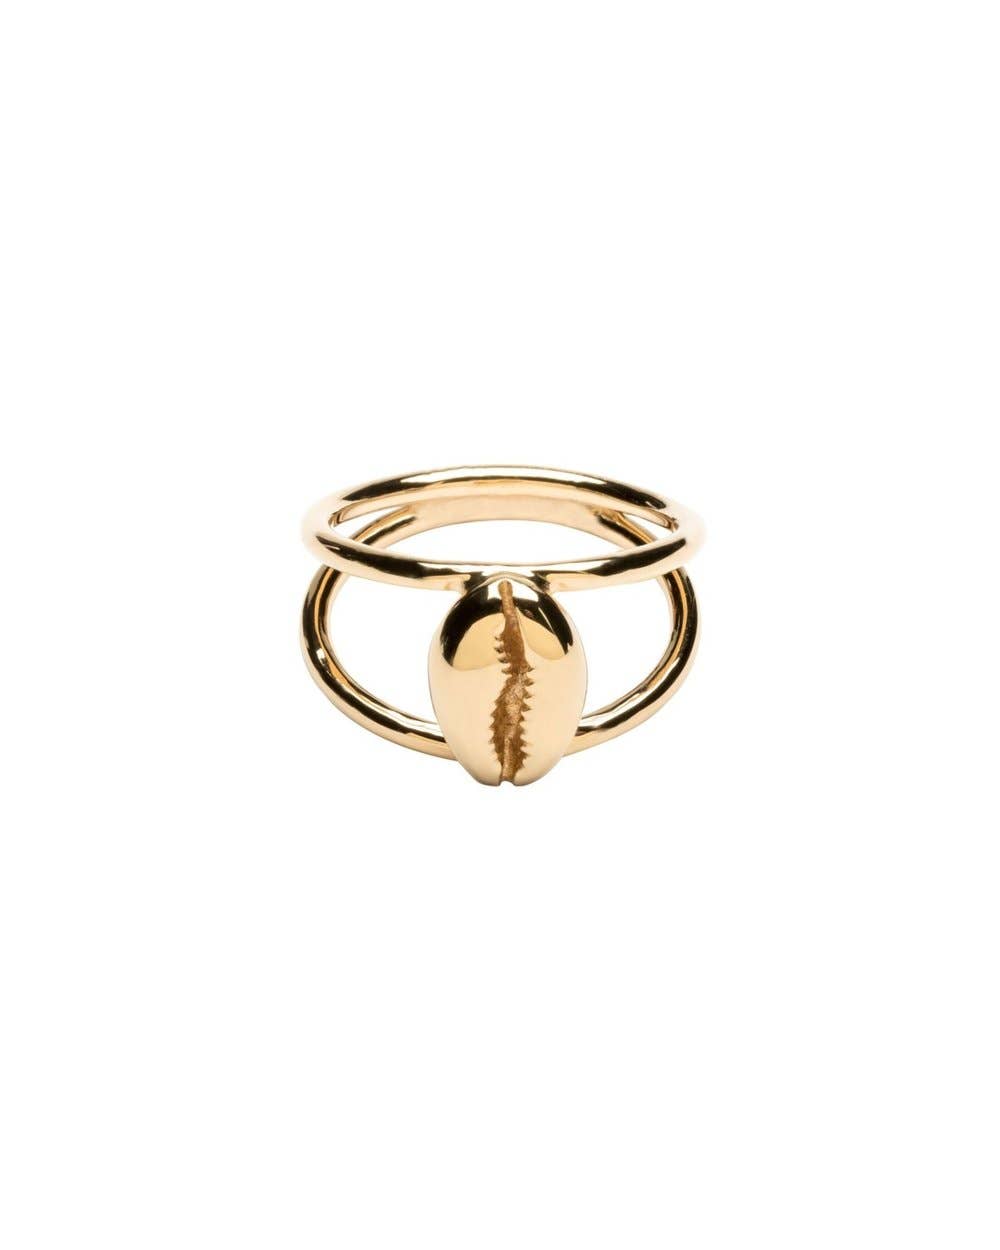 Ocean Cowrie Shell Ring in Gold